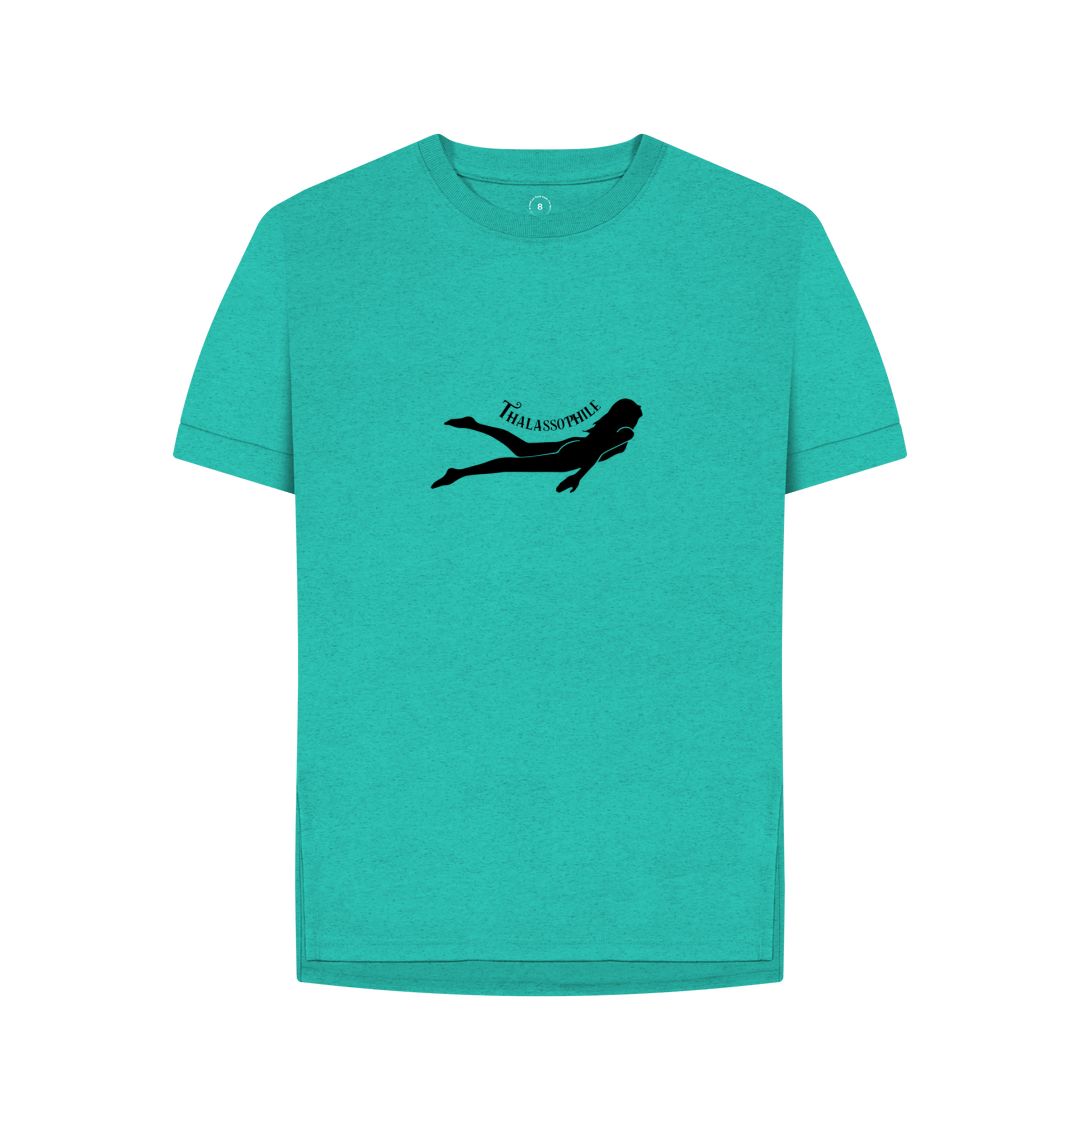 Seagrass Green 'THALASSOPHILE' Ladies Tee (Relaxed Fit)